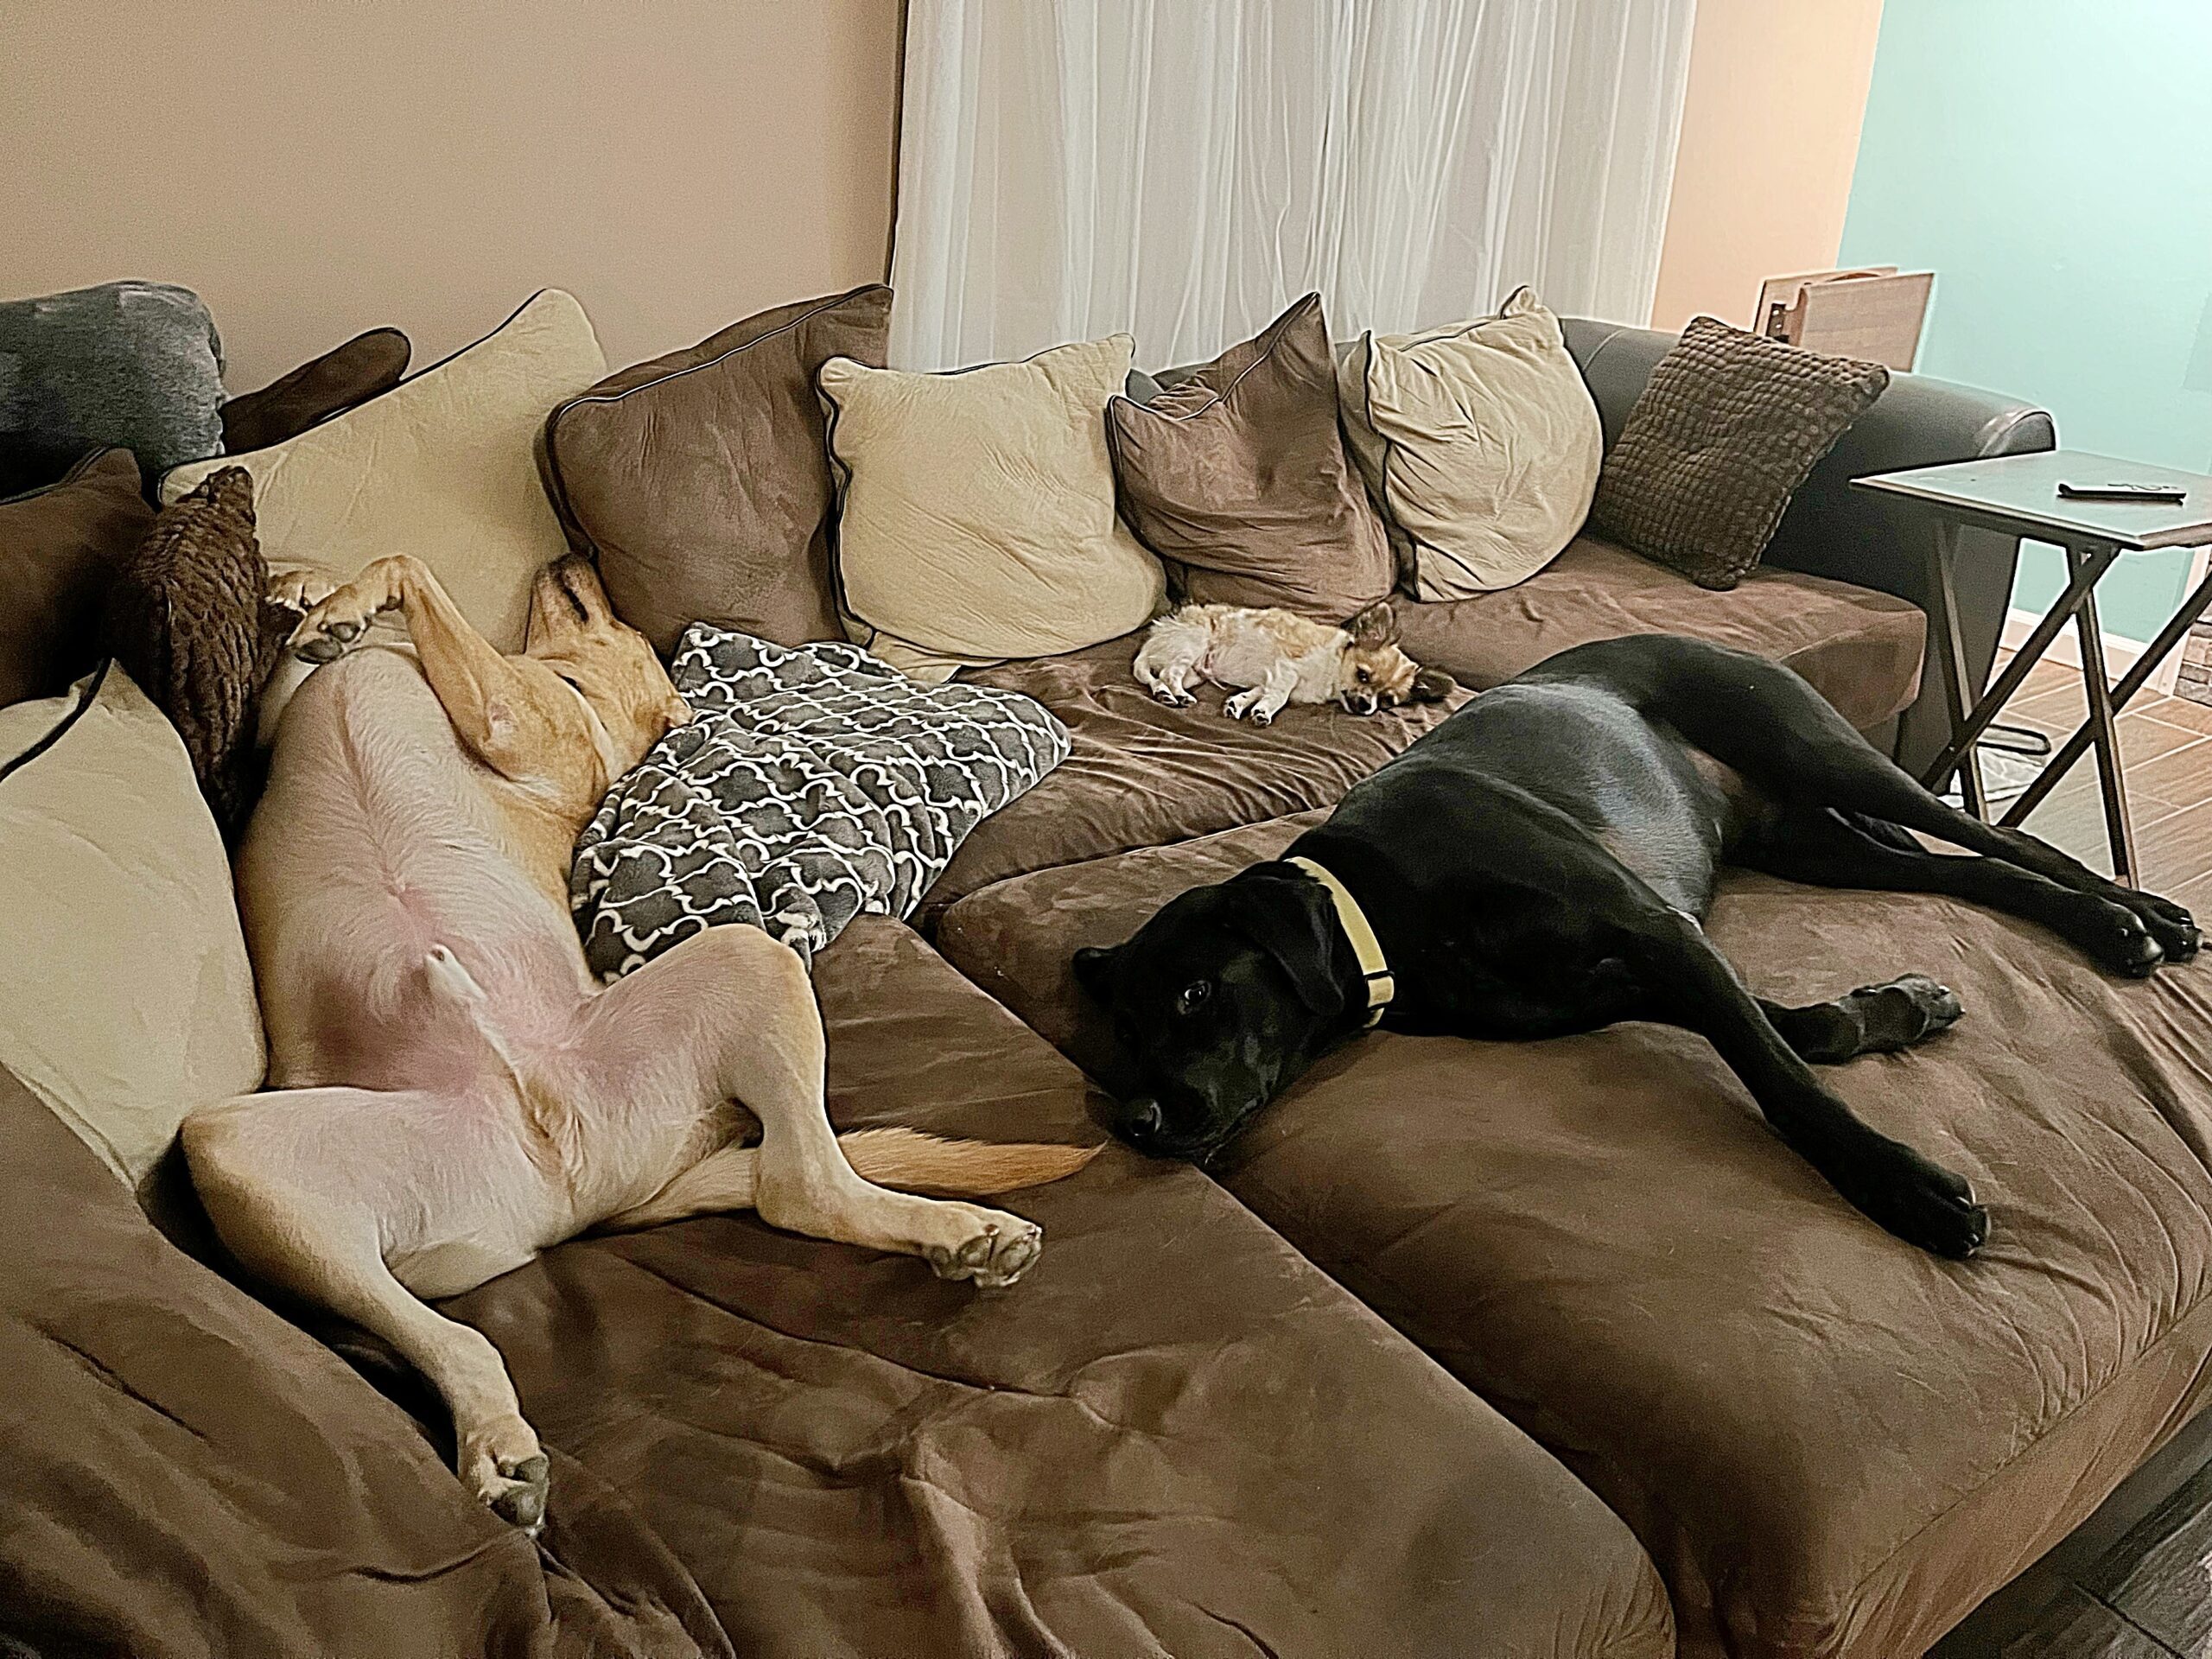 An image featuring a cozy and secure overnight pet care setup. The image showcases three dogs sprawled out on the couch. It represents the introduction of new overnight pet care services for 2023, emphasizing the commitment to ensuring the well-being and security of dogs while their owners are away.